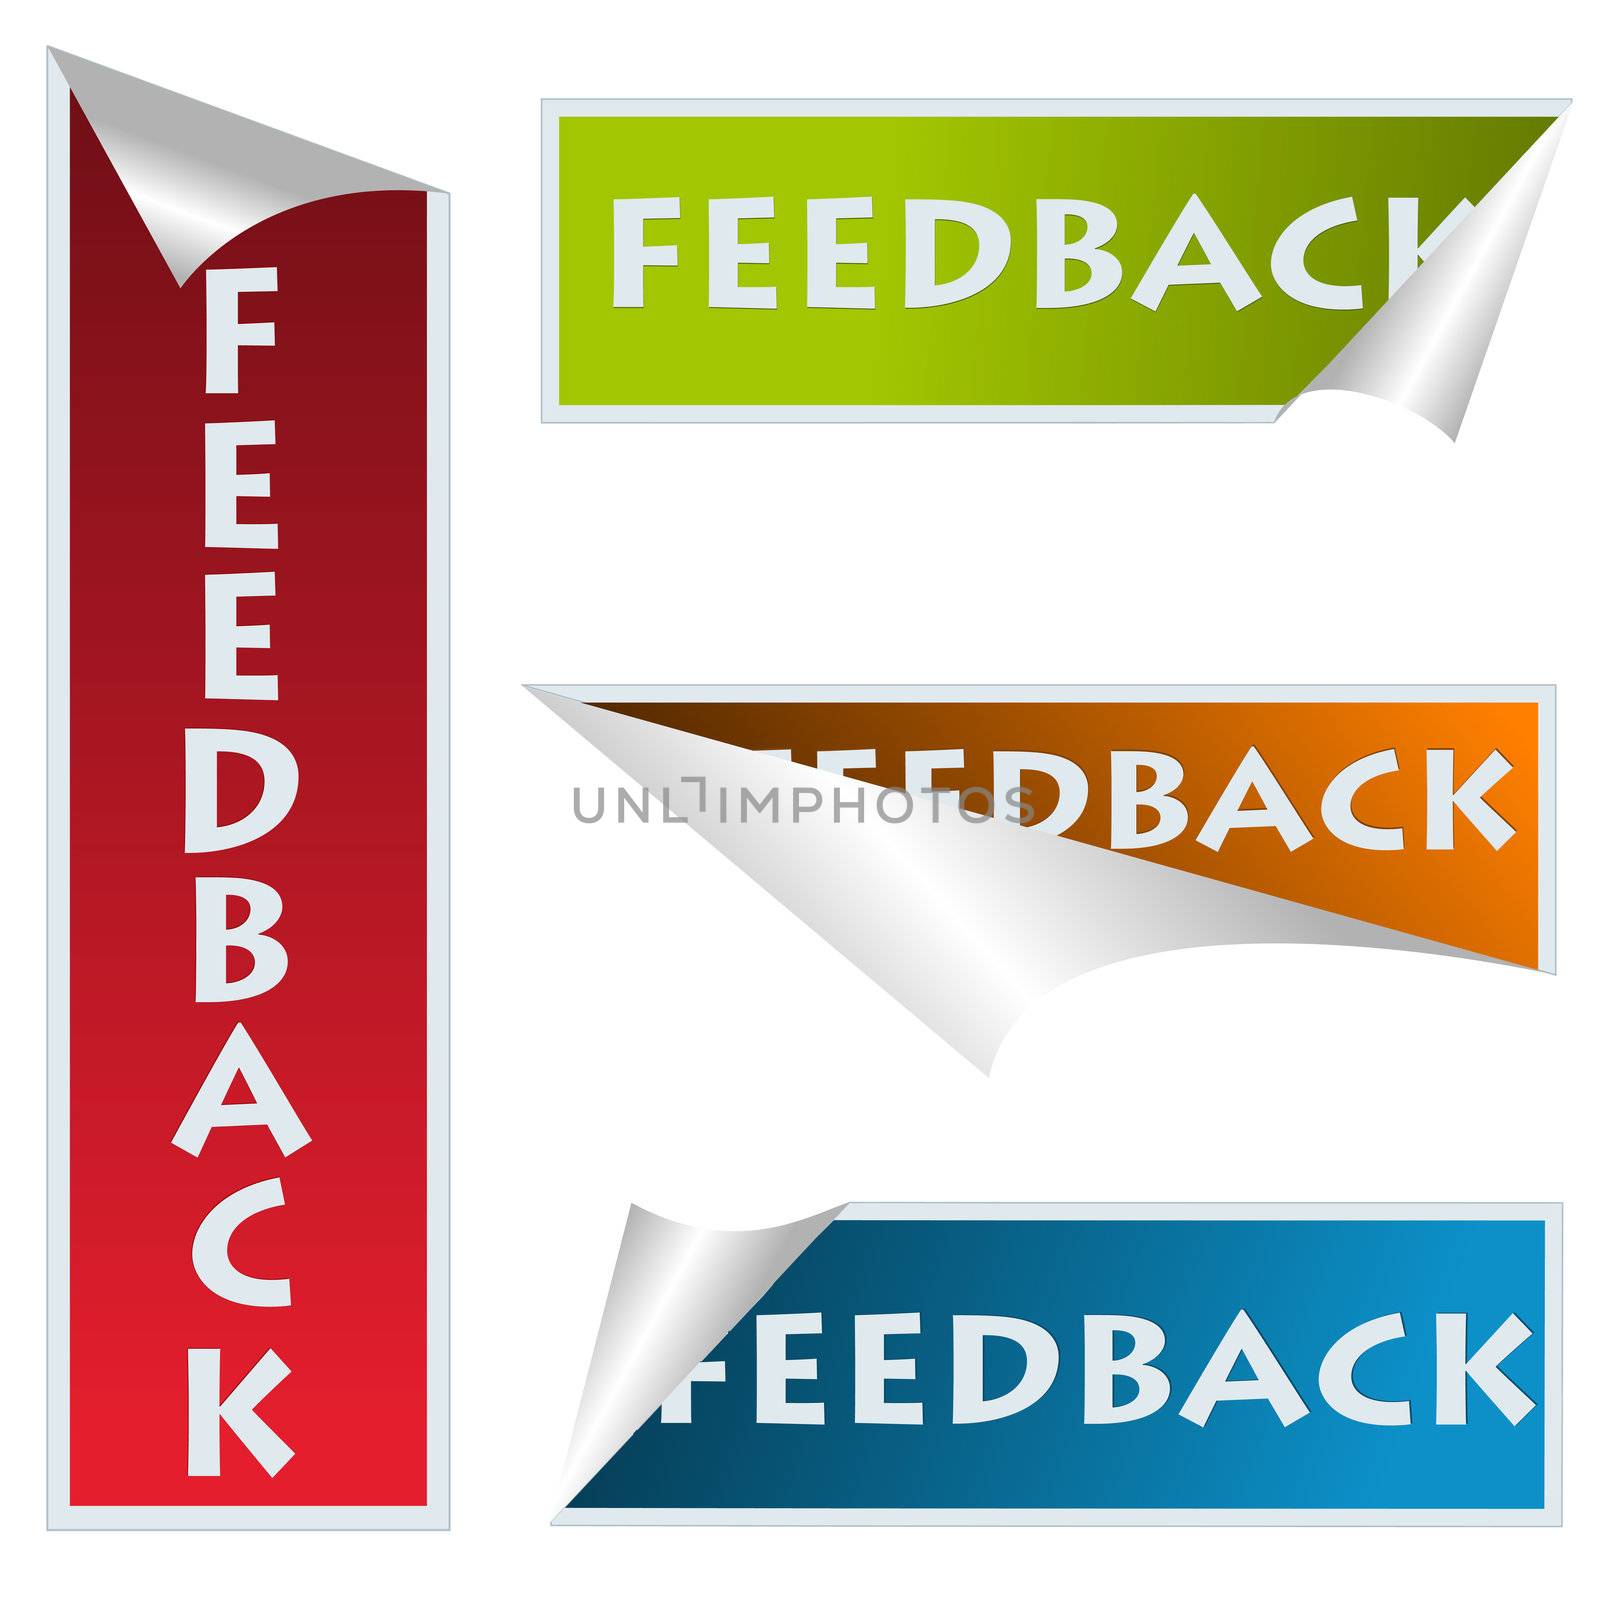 Curved corner feedback stickers over white